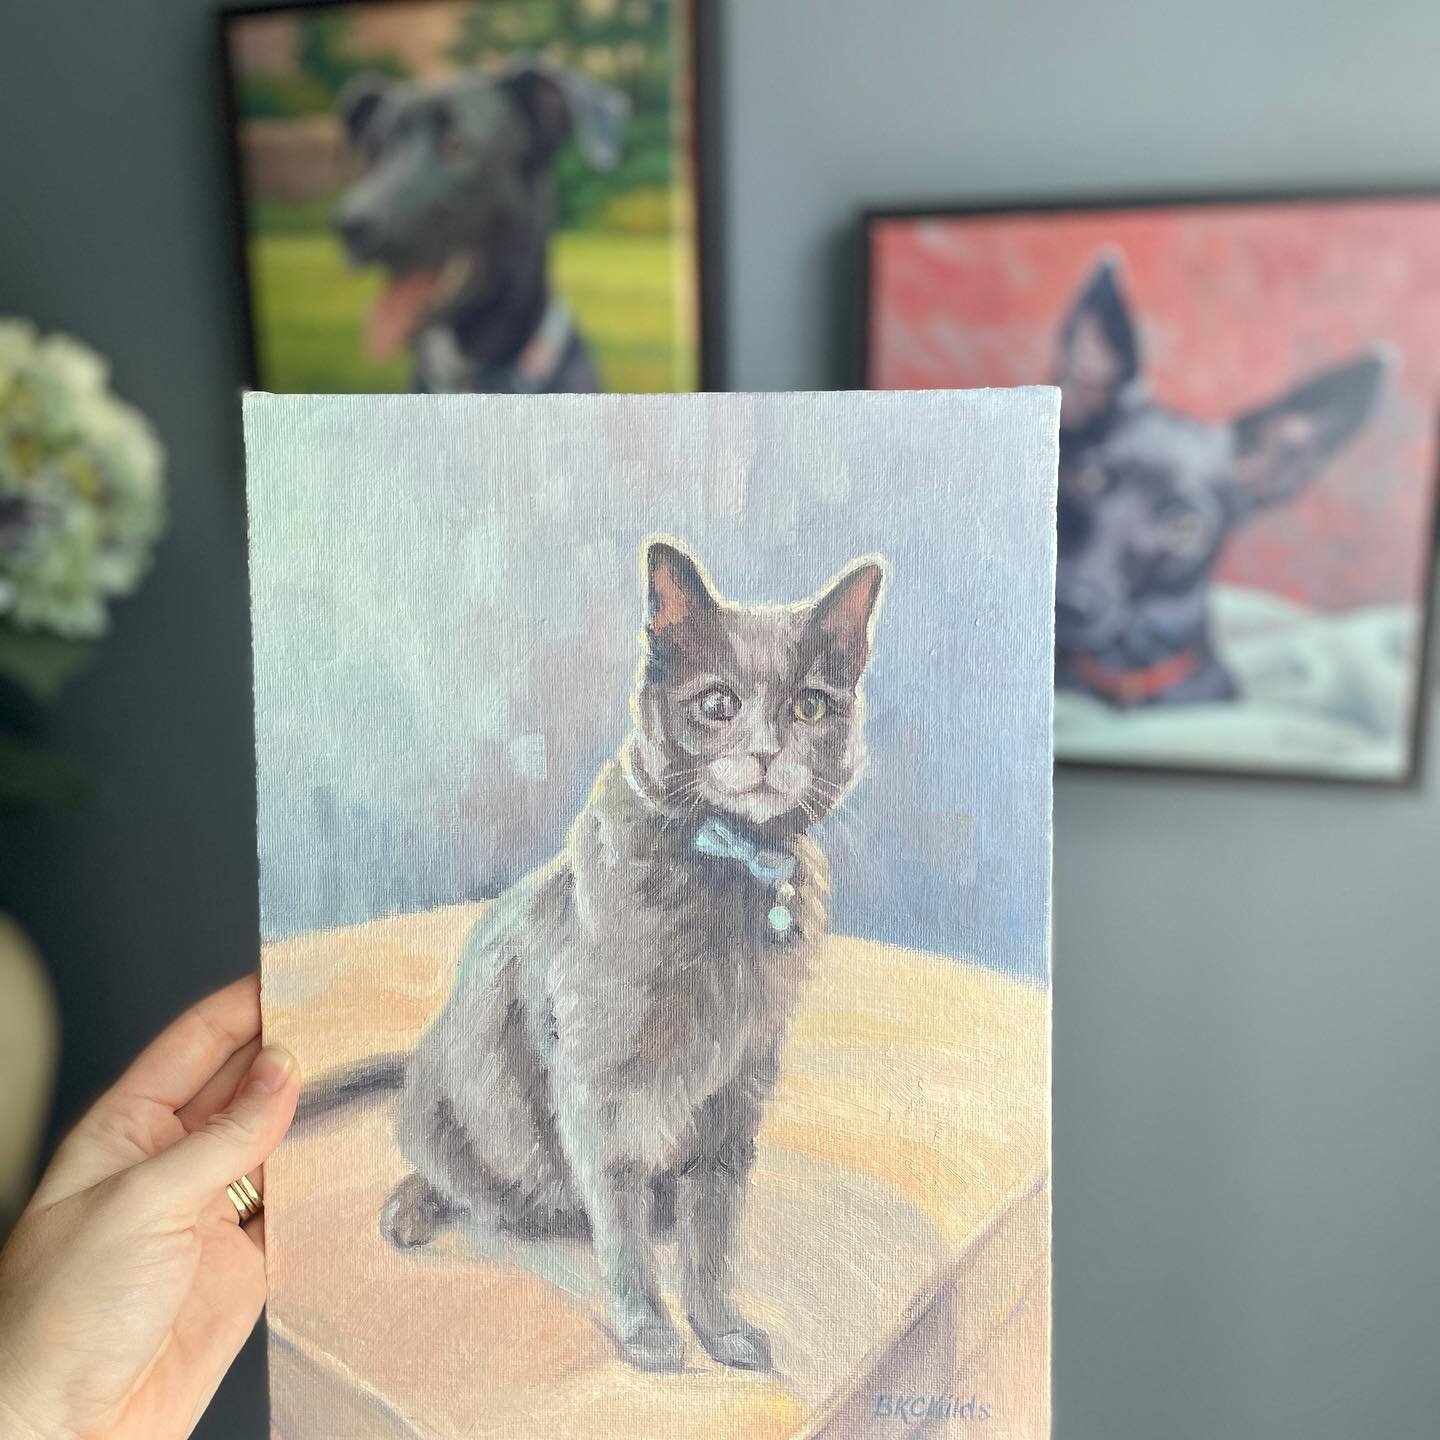 Best birthday gift from my mom! She is such a talented oil painter and I&rsquo;ve been begging her to paint our cat Nimby for me. Adding it to our fur baby collection. If anyone needs a pet portrait let me know! 🥰